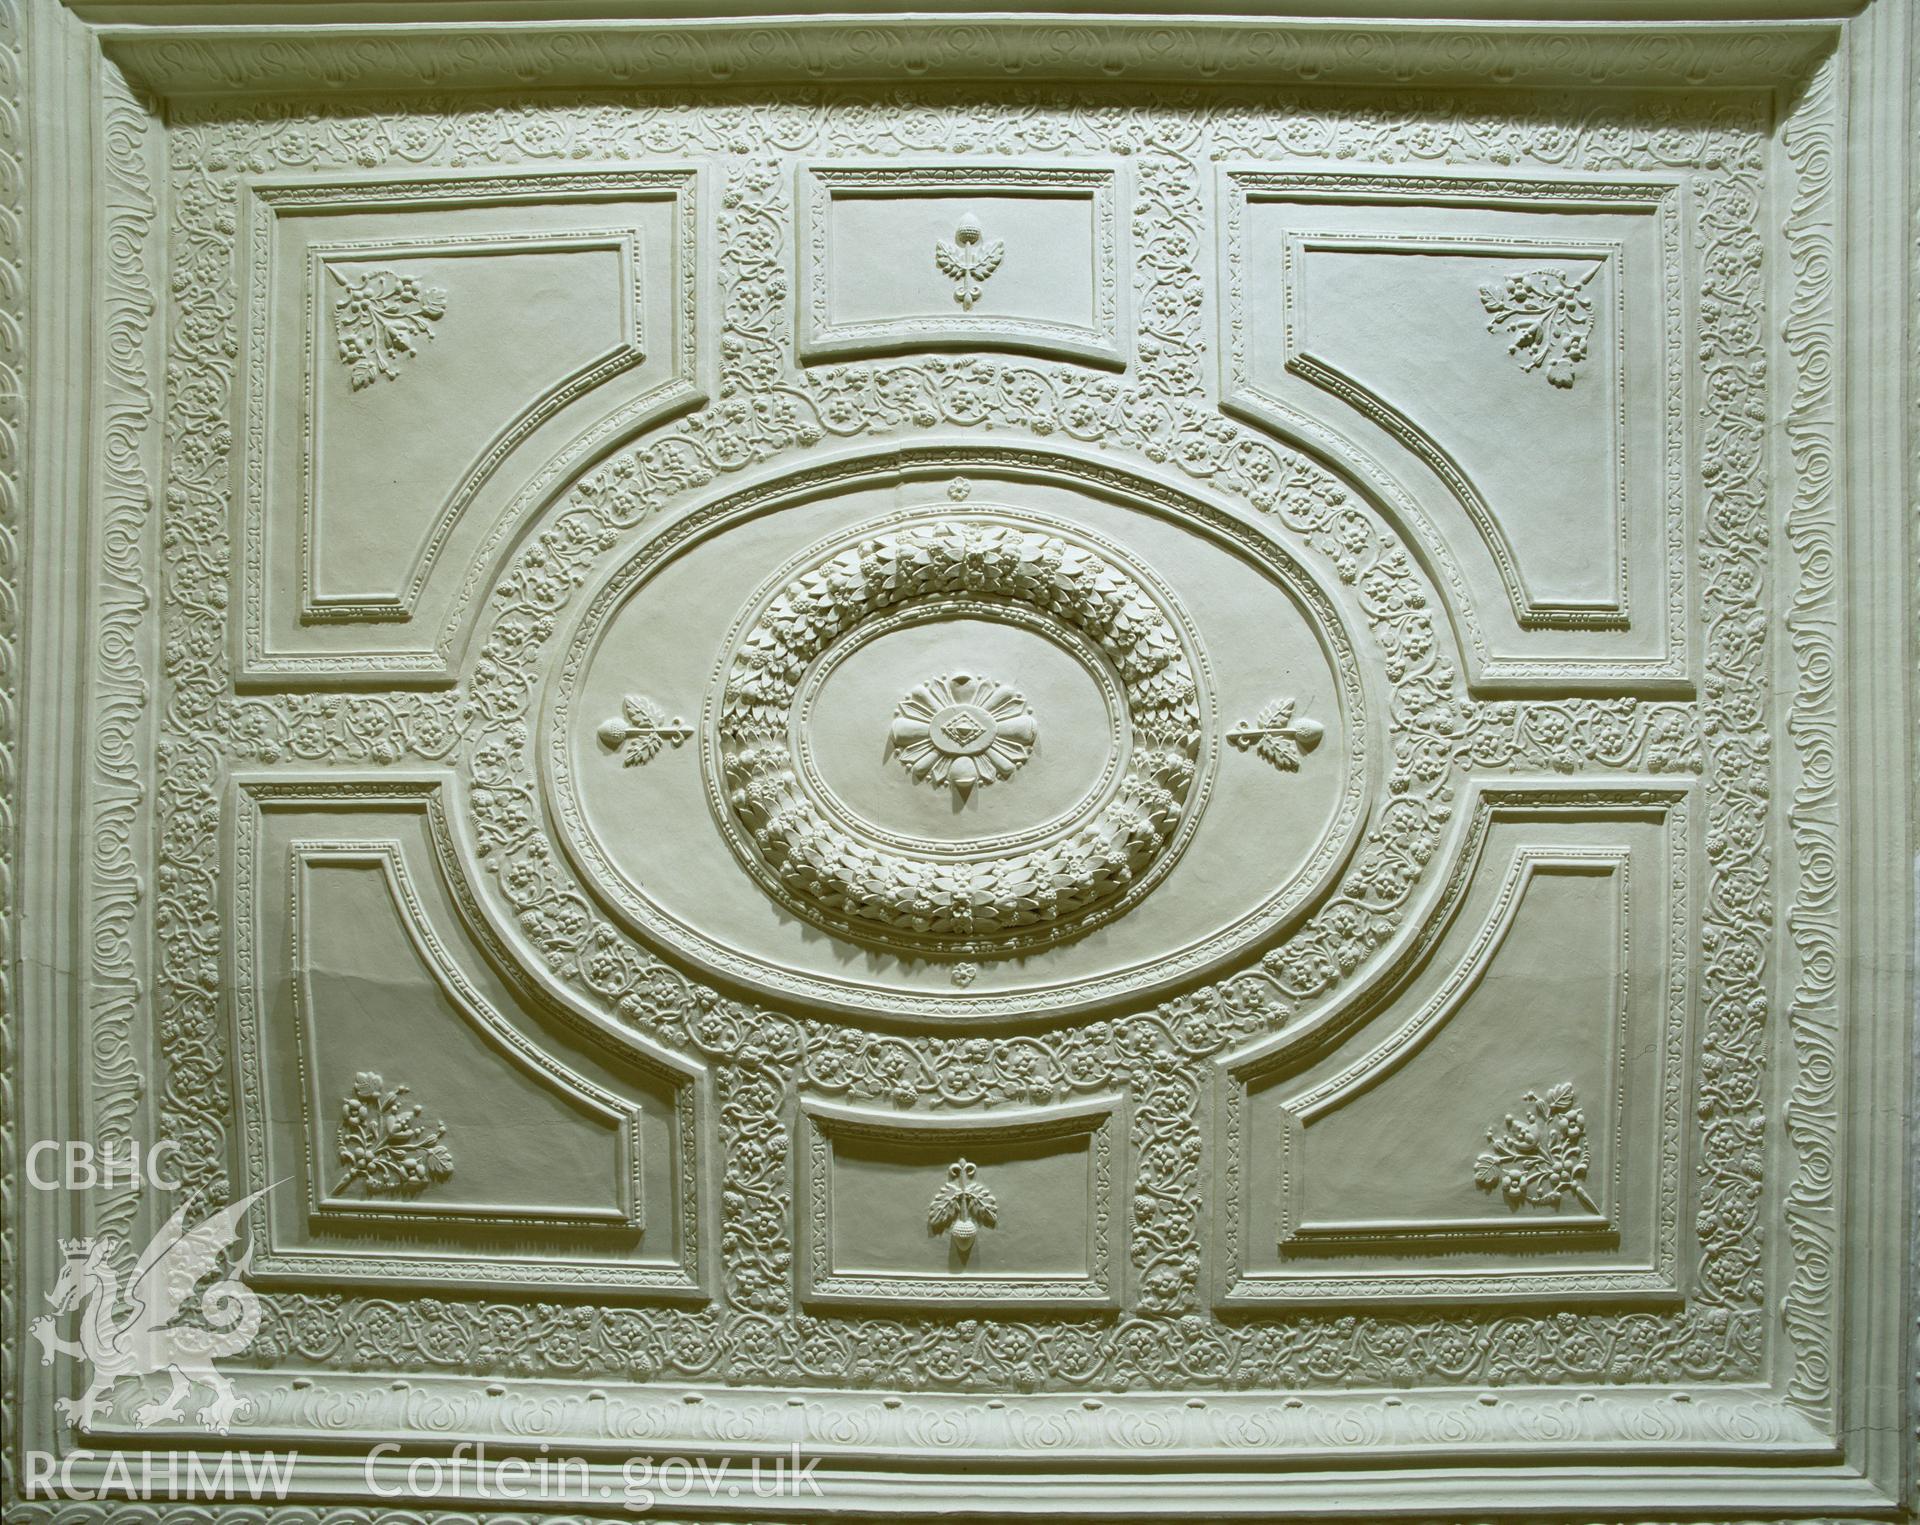 Colour transparency showing view of decorated ceiling at Newton House, Dinefwr, produced by Iain Wright, June 2004.